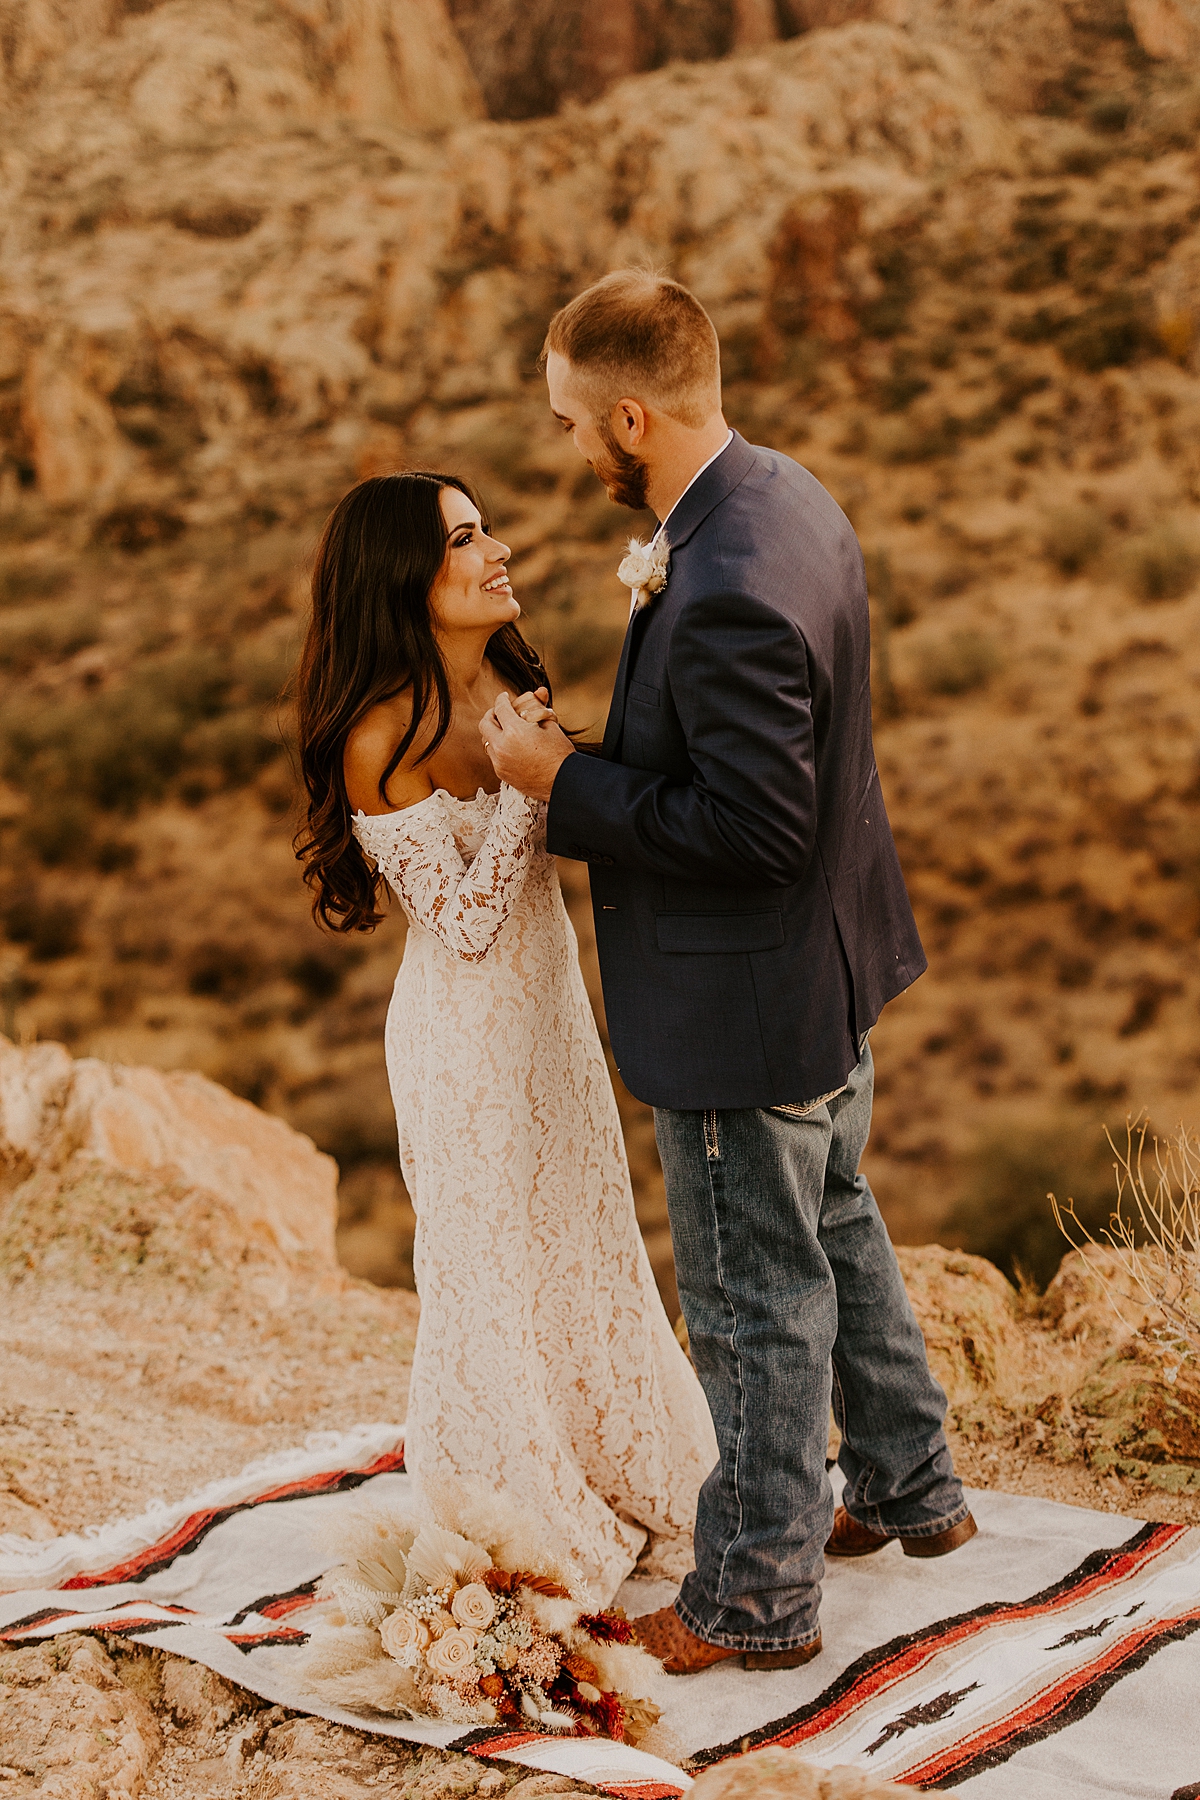 Intimate-elopement-in-superstition-mountain-wilderness-allison-slater-photography62.jpg